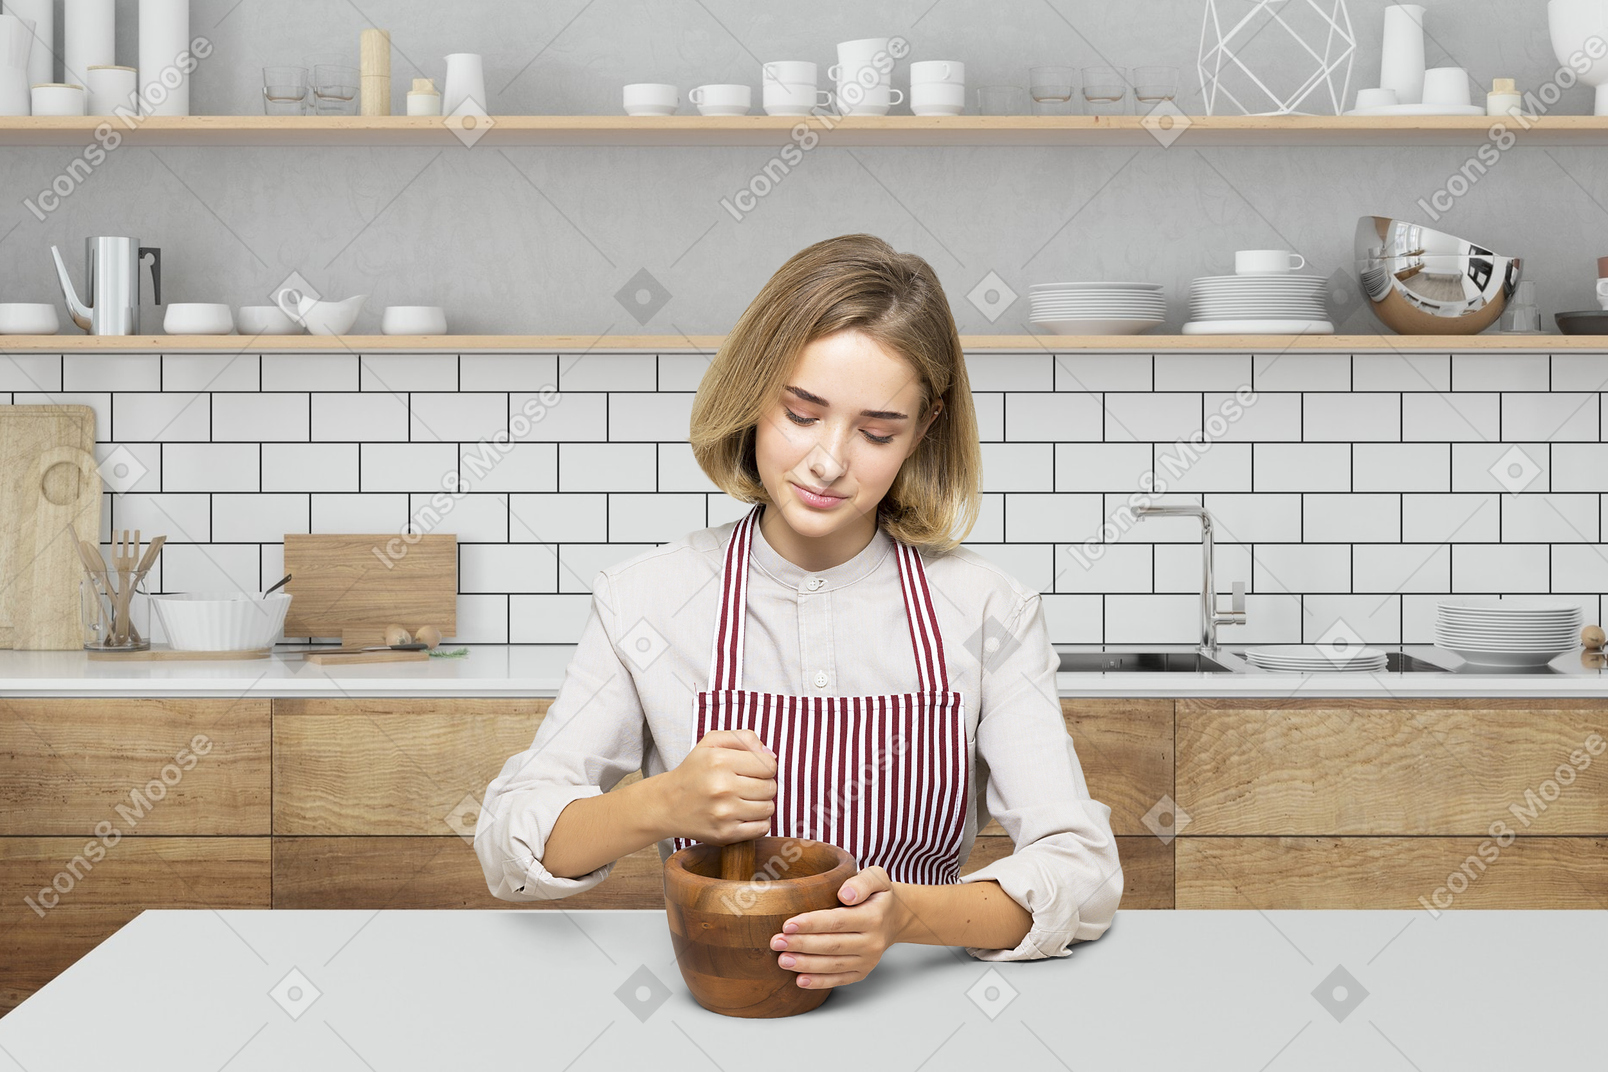 A woman in an apron mixing a cup in a kitchen